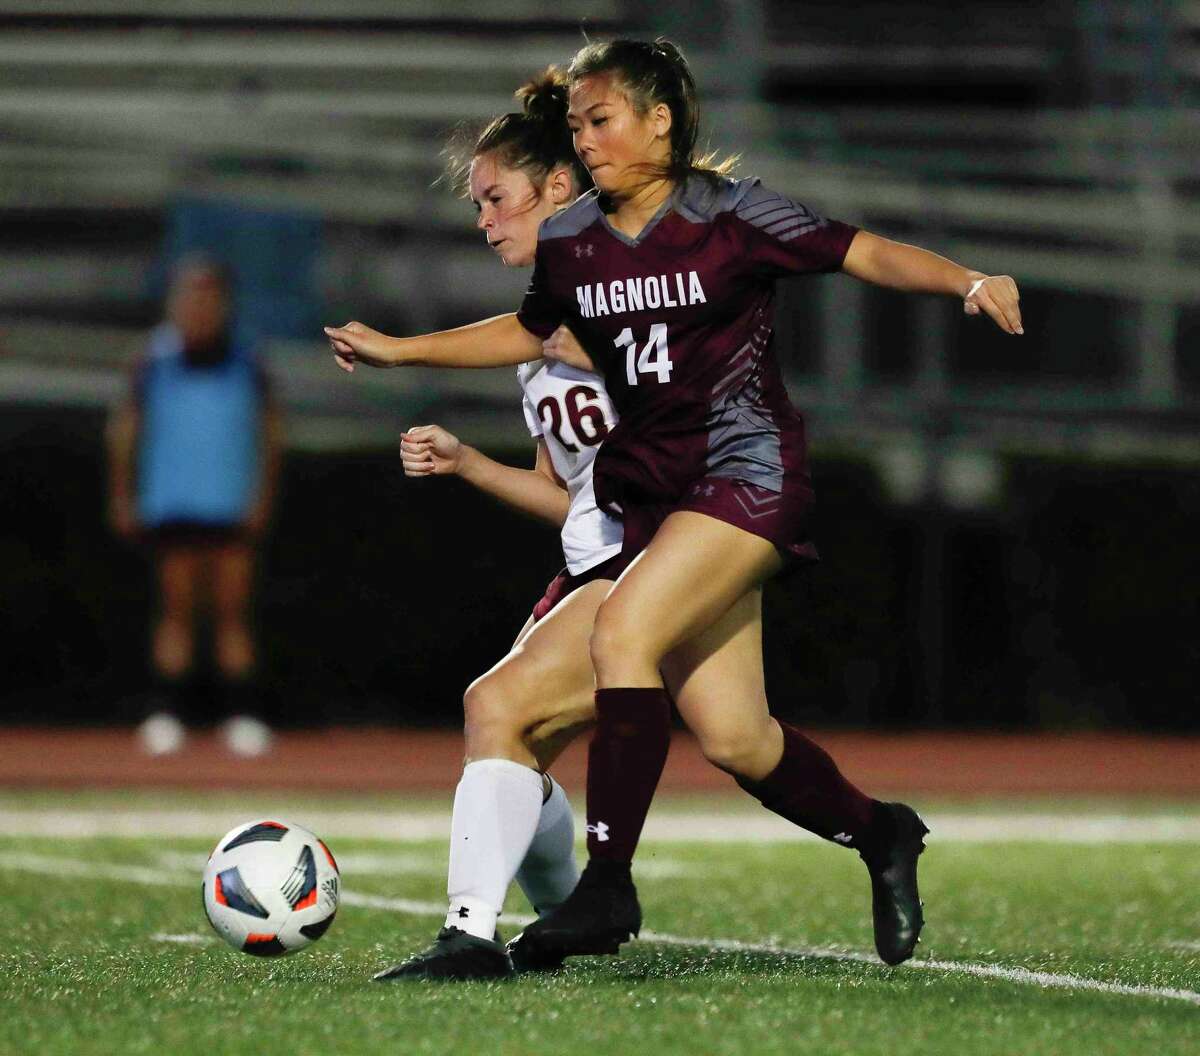 Magnolia’s Tate Perugini (14) dribbles the ball against Magnolia West’s Abigail Garcia (24) in the first period of a high school soccer match at Magnolia High School, Friday, March 4, 2022, in Magnolia.